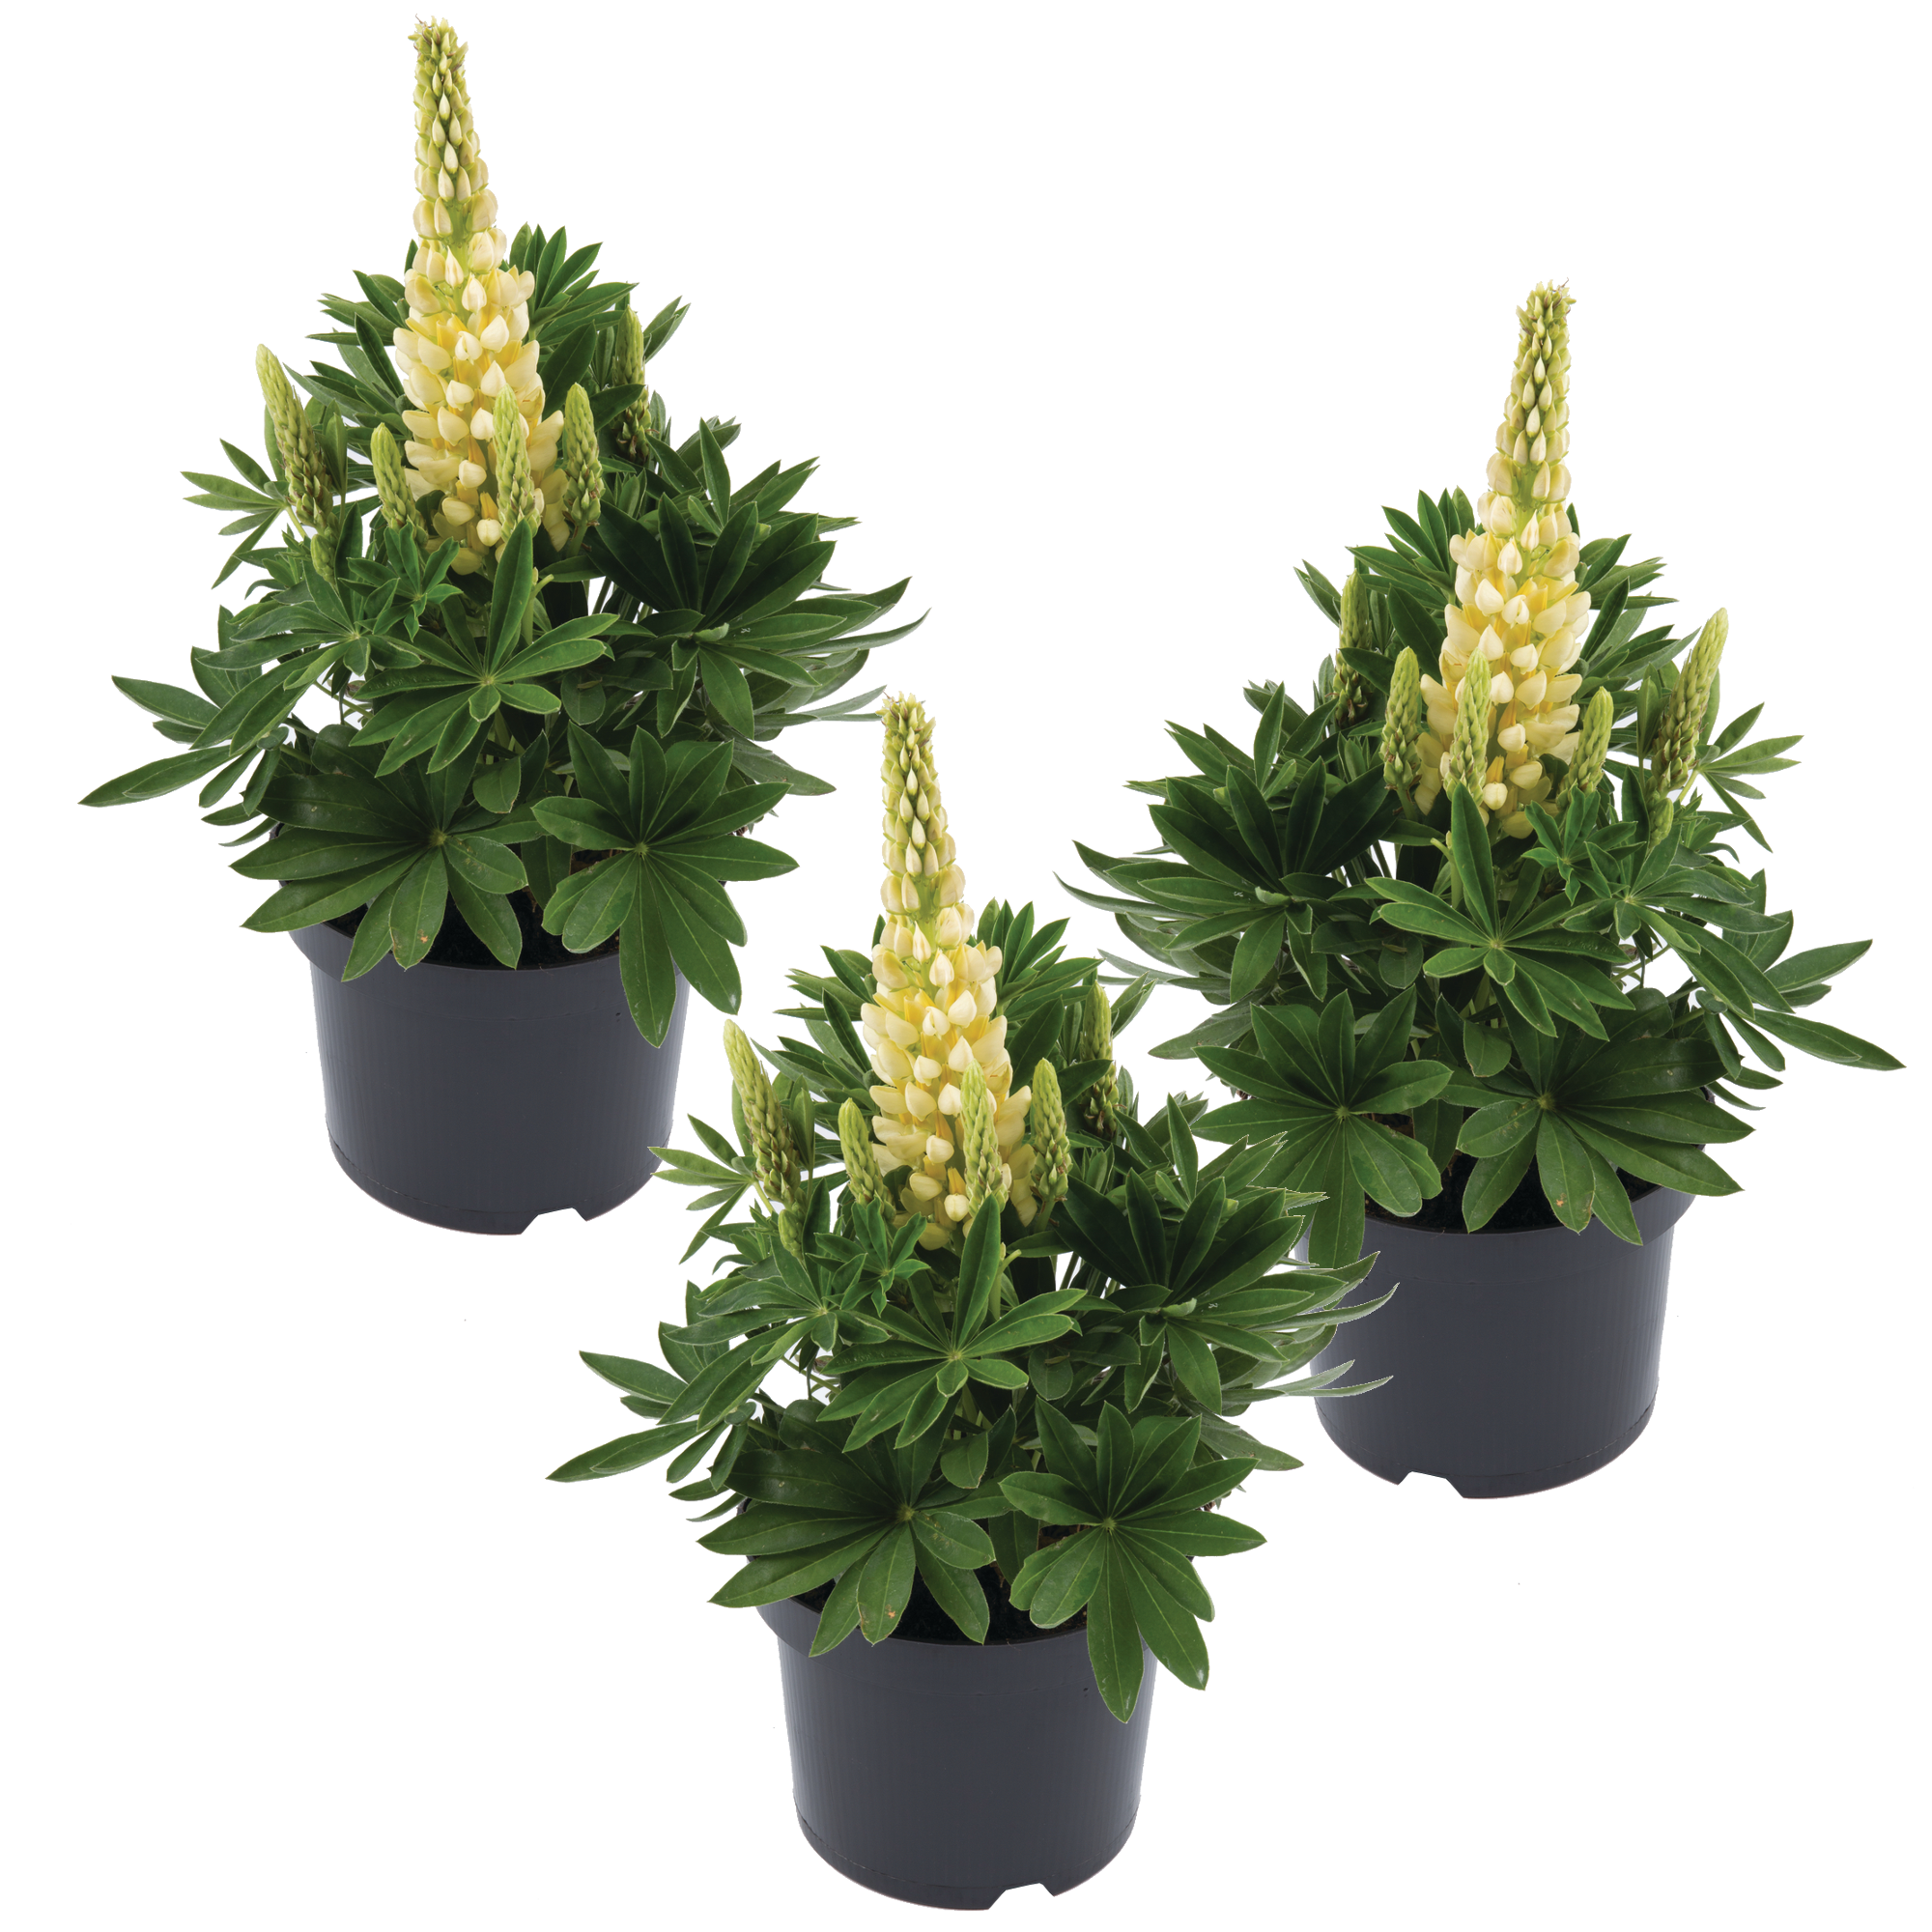 Lupine 'Gallery Yellow Shades' gelb 11 cm Topf, 3er-Set + product picture